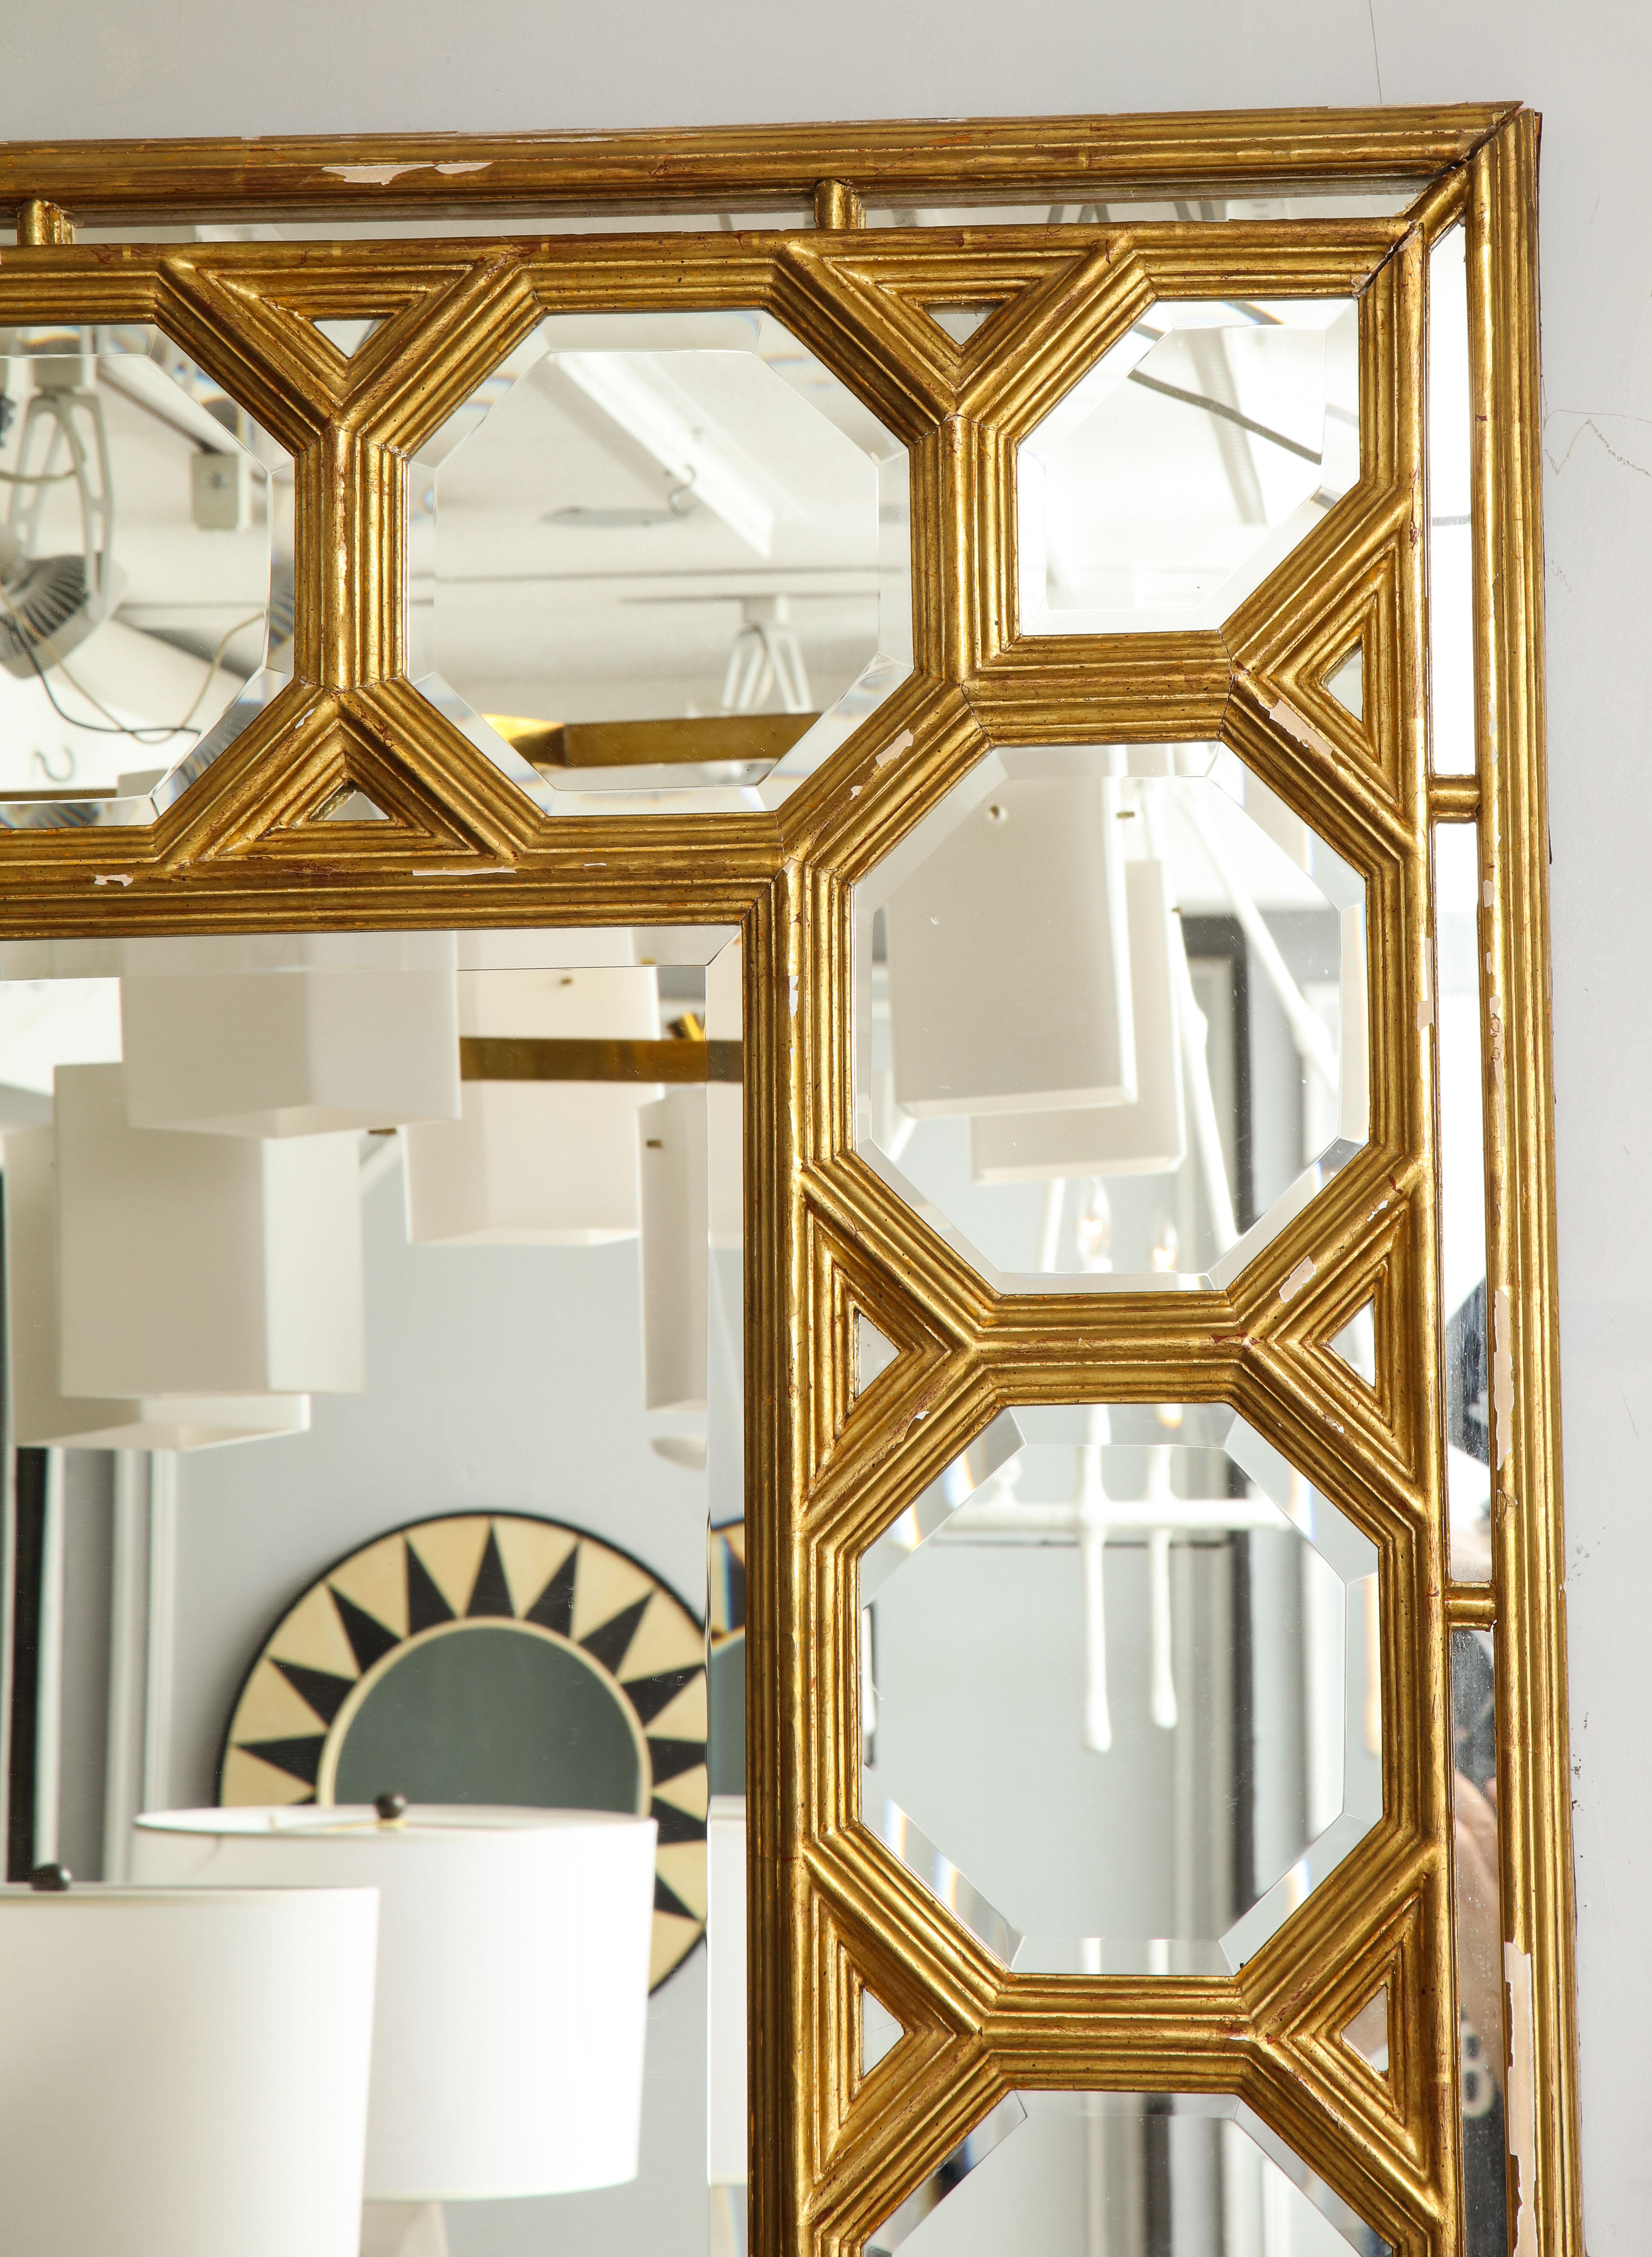 Hand carved giltwood mirror with graphic octagonal design along border.